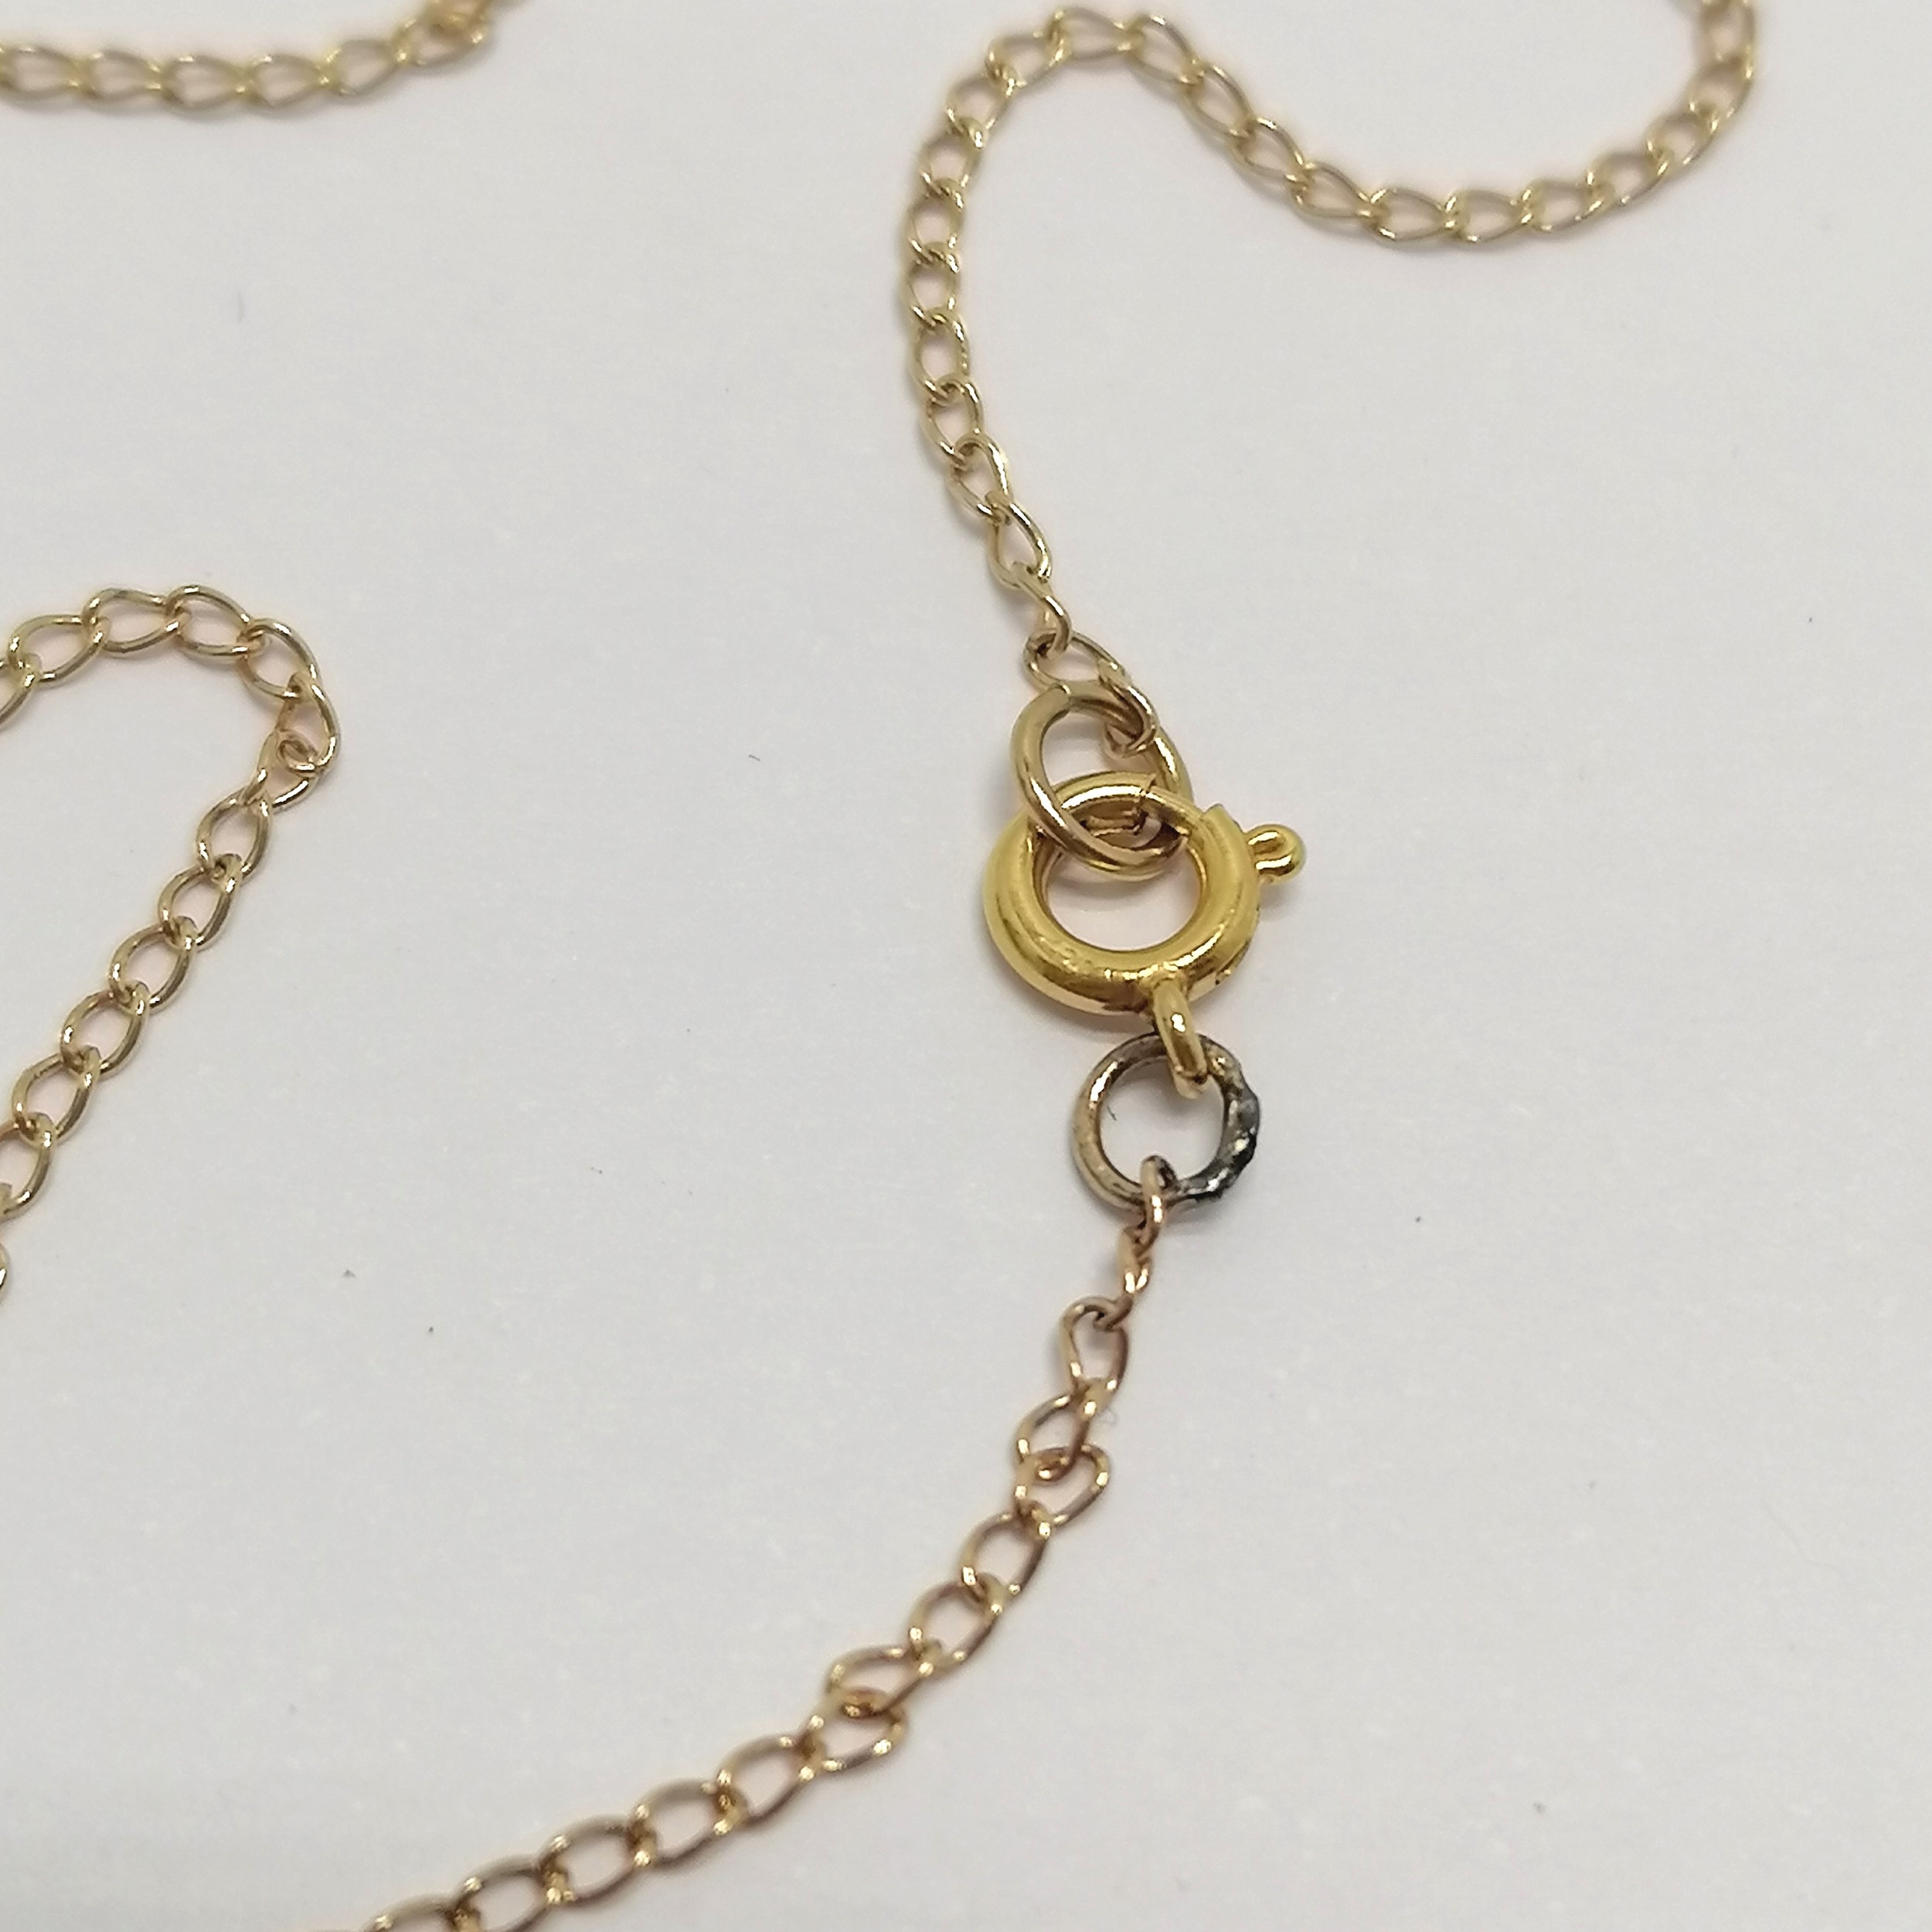 9ct (indistinctly marked) gold fine 48cm chain - 1.3g - old repair to connecting ring - Image 2 of 2